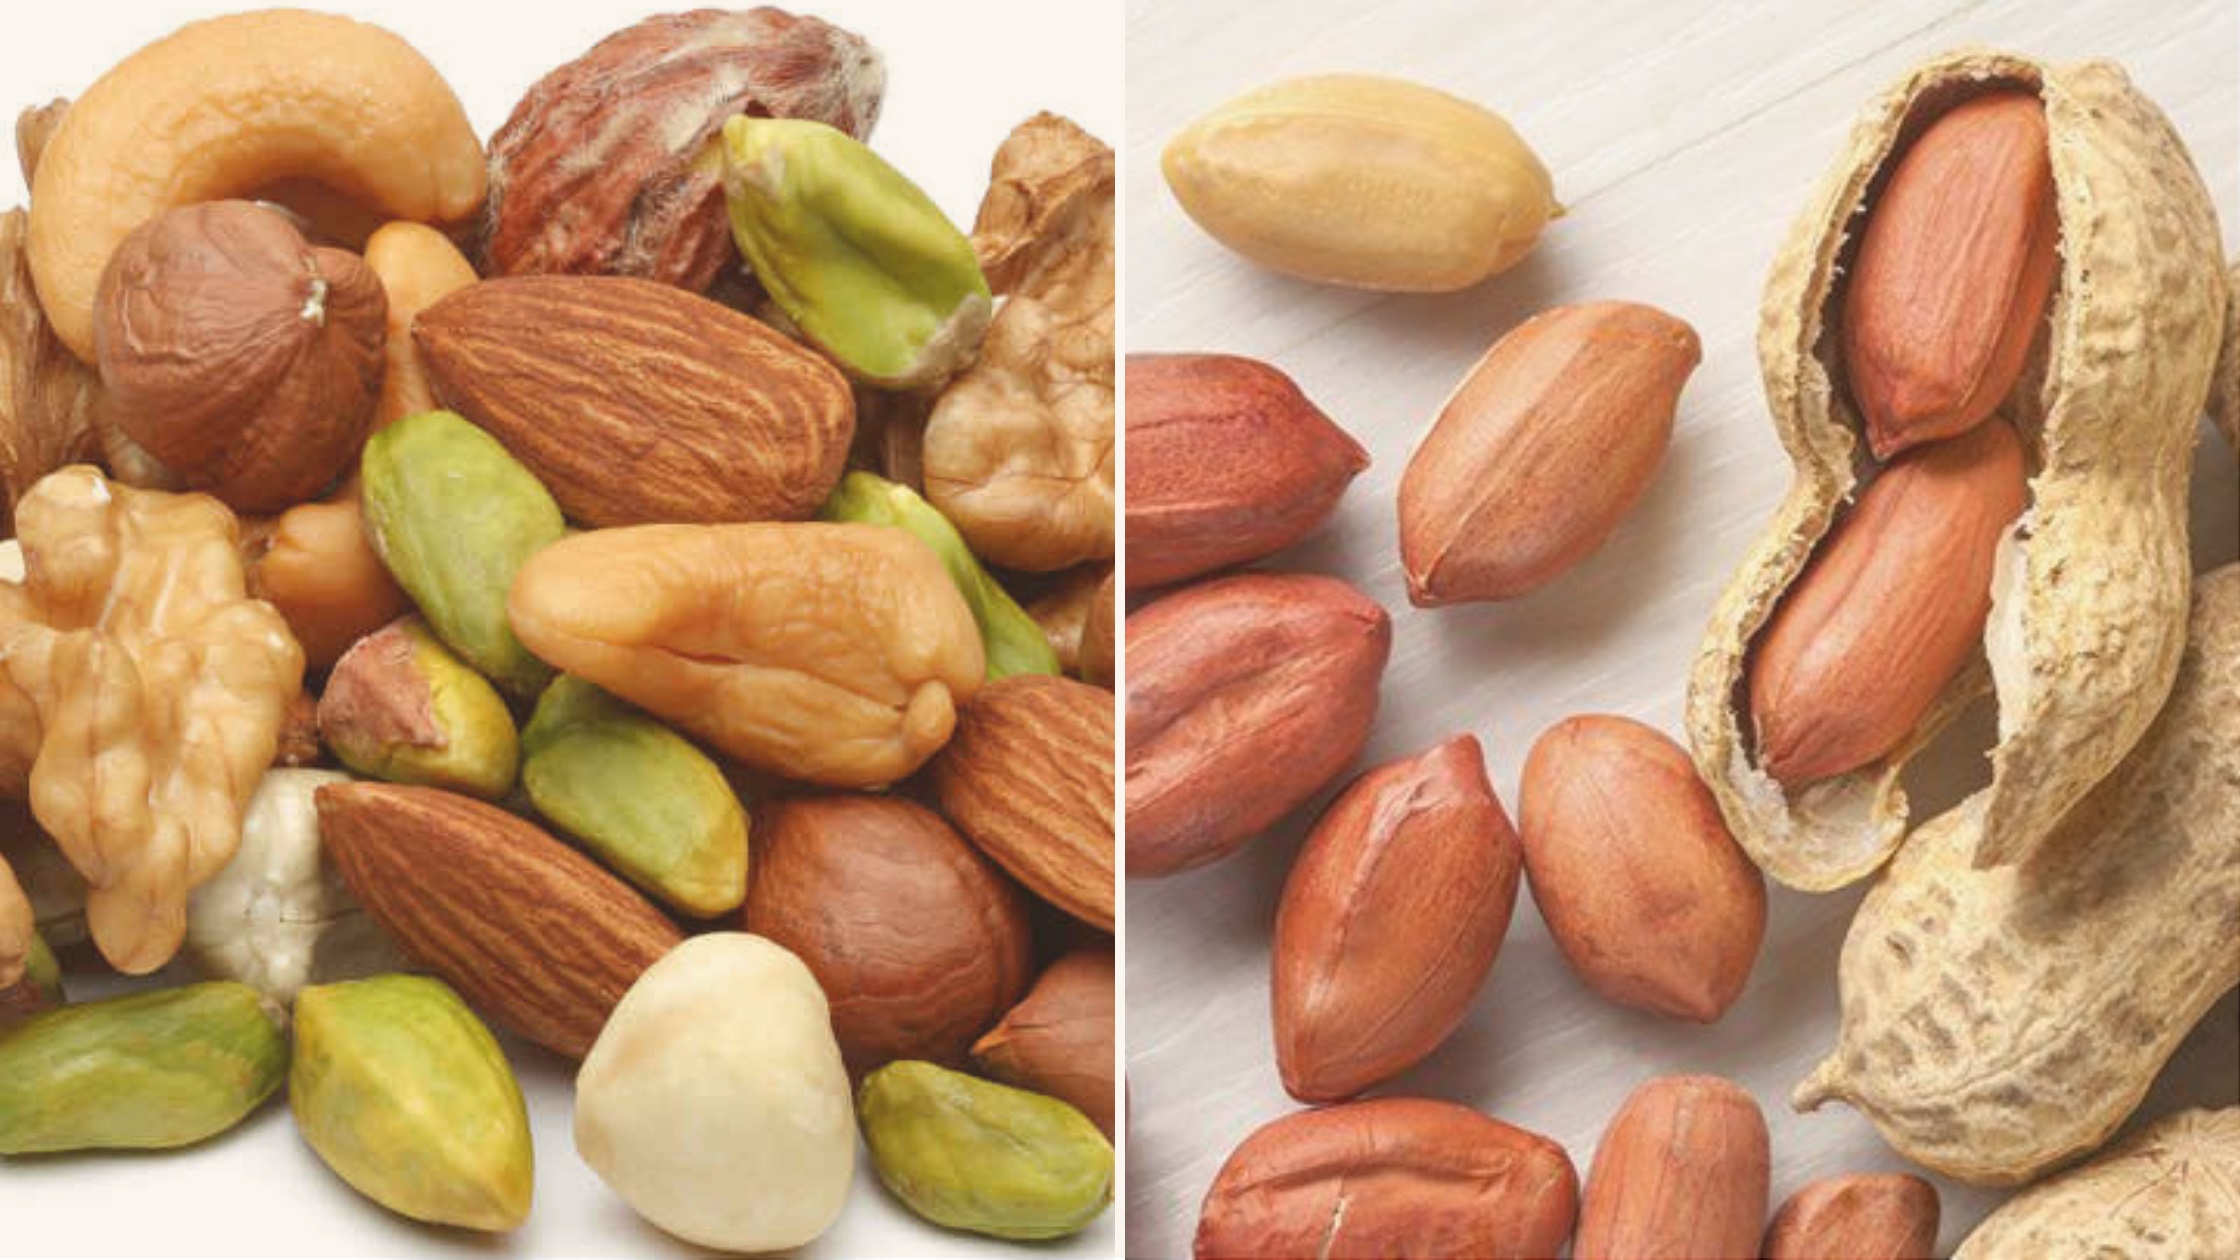 A Focus On Peanuts, Tree Nuts, And Pine Nuts, To Not Go Nuts